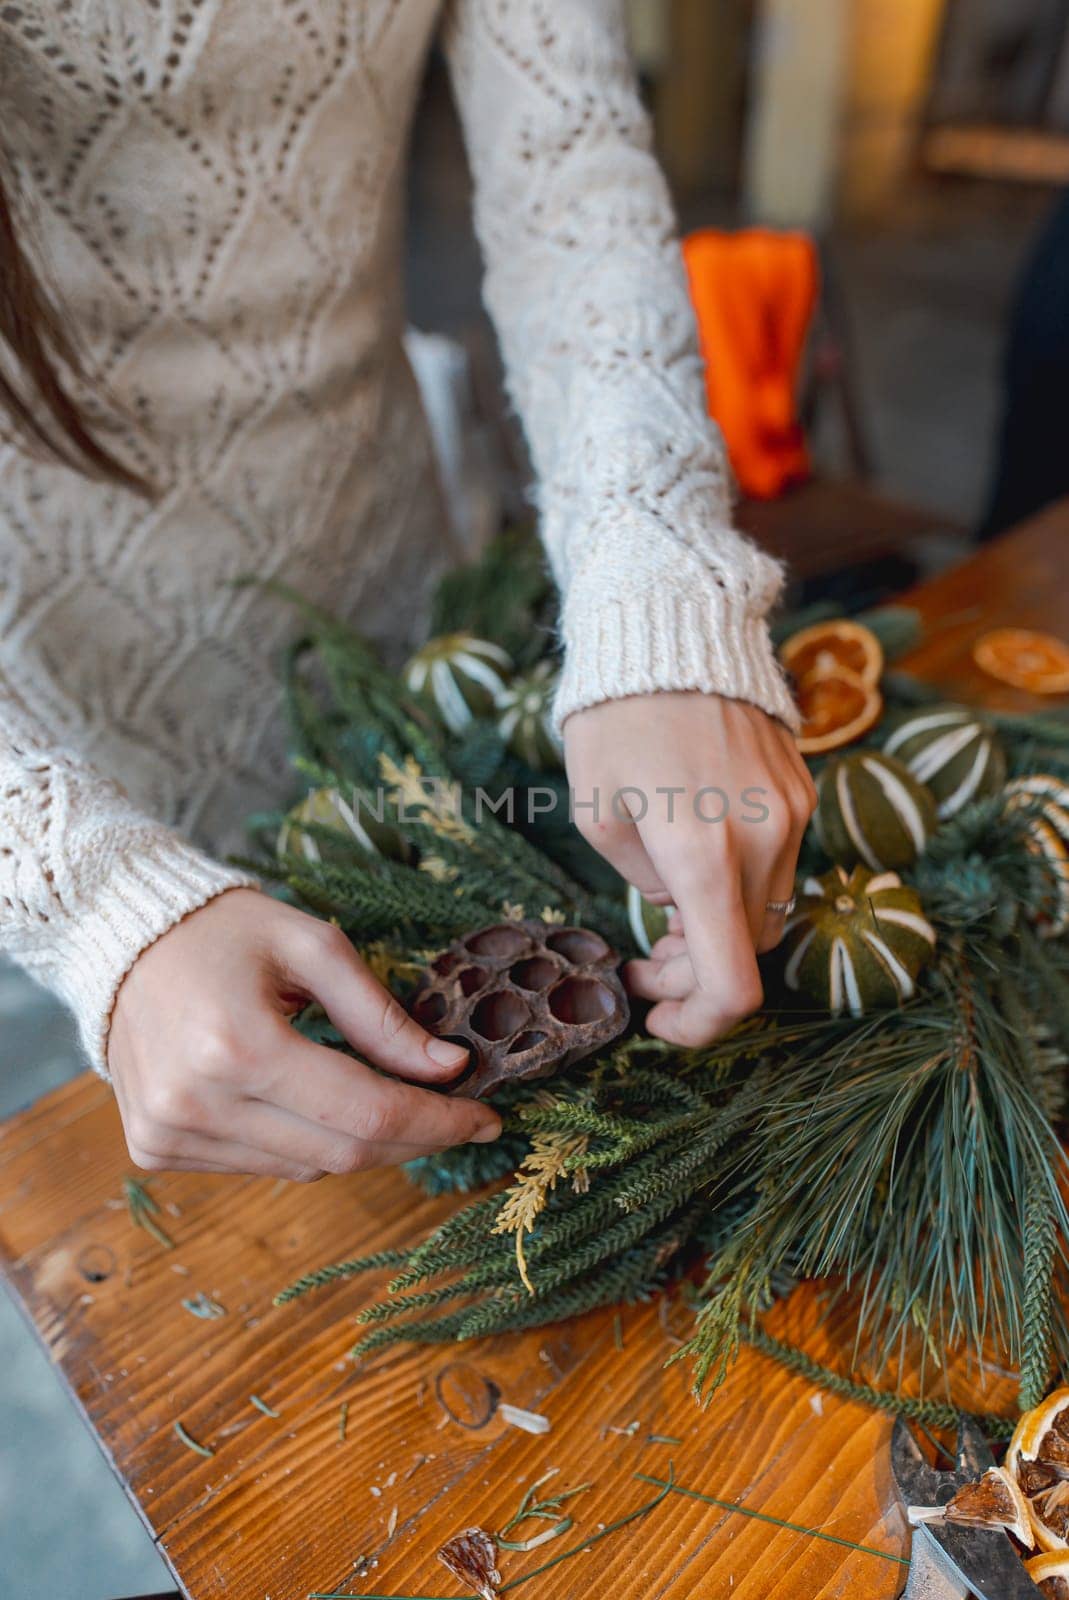 Crafting session teaching how to make Christmas wreaths and New Year's decor. High quality photo